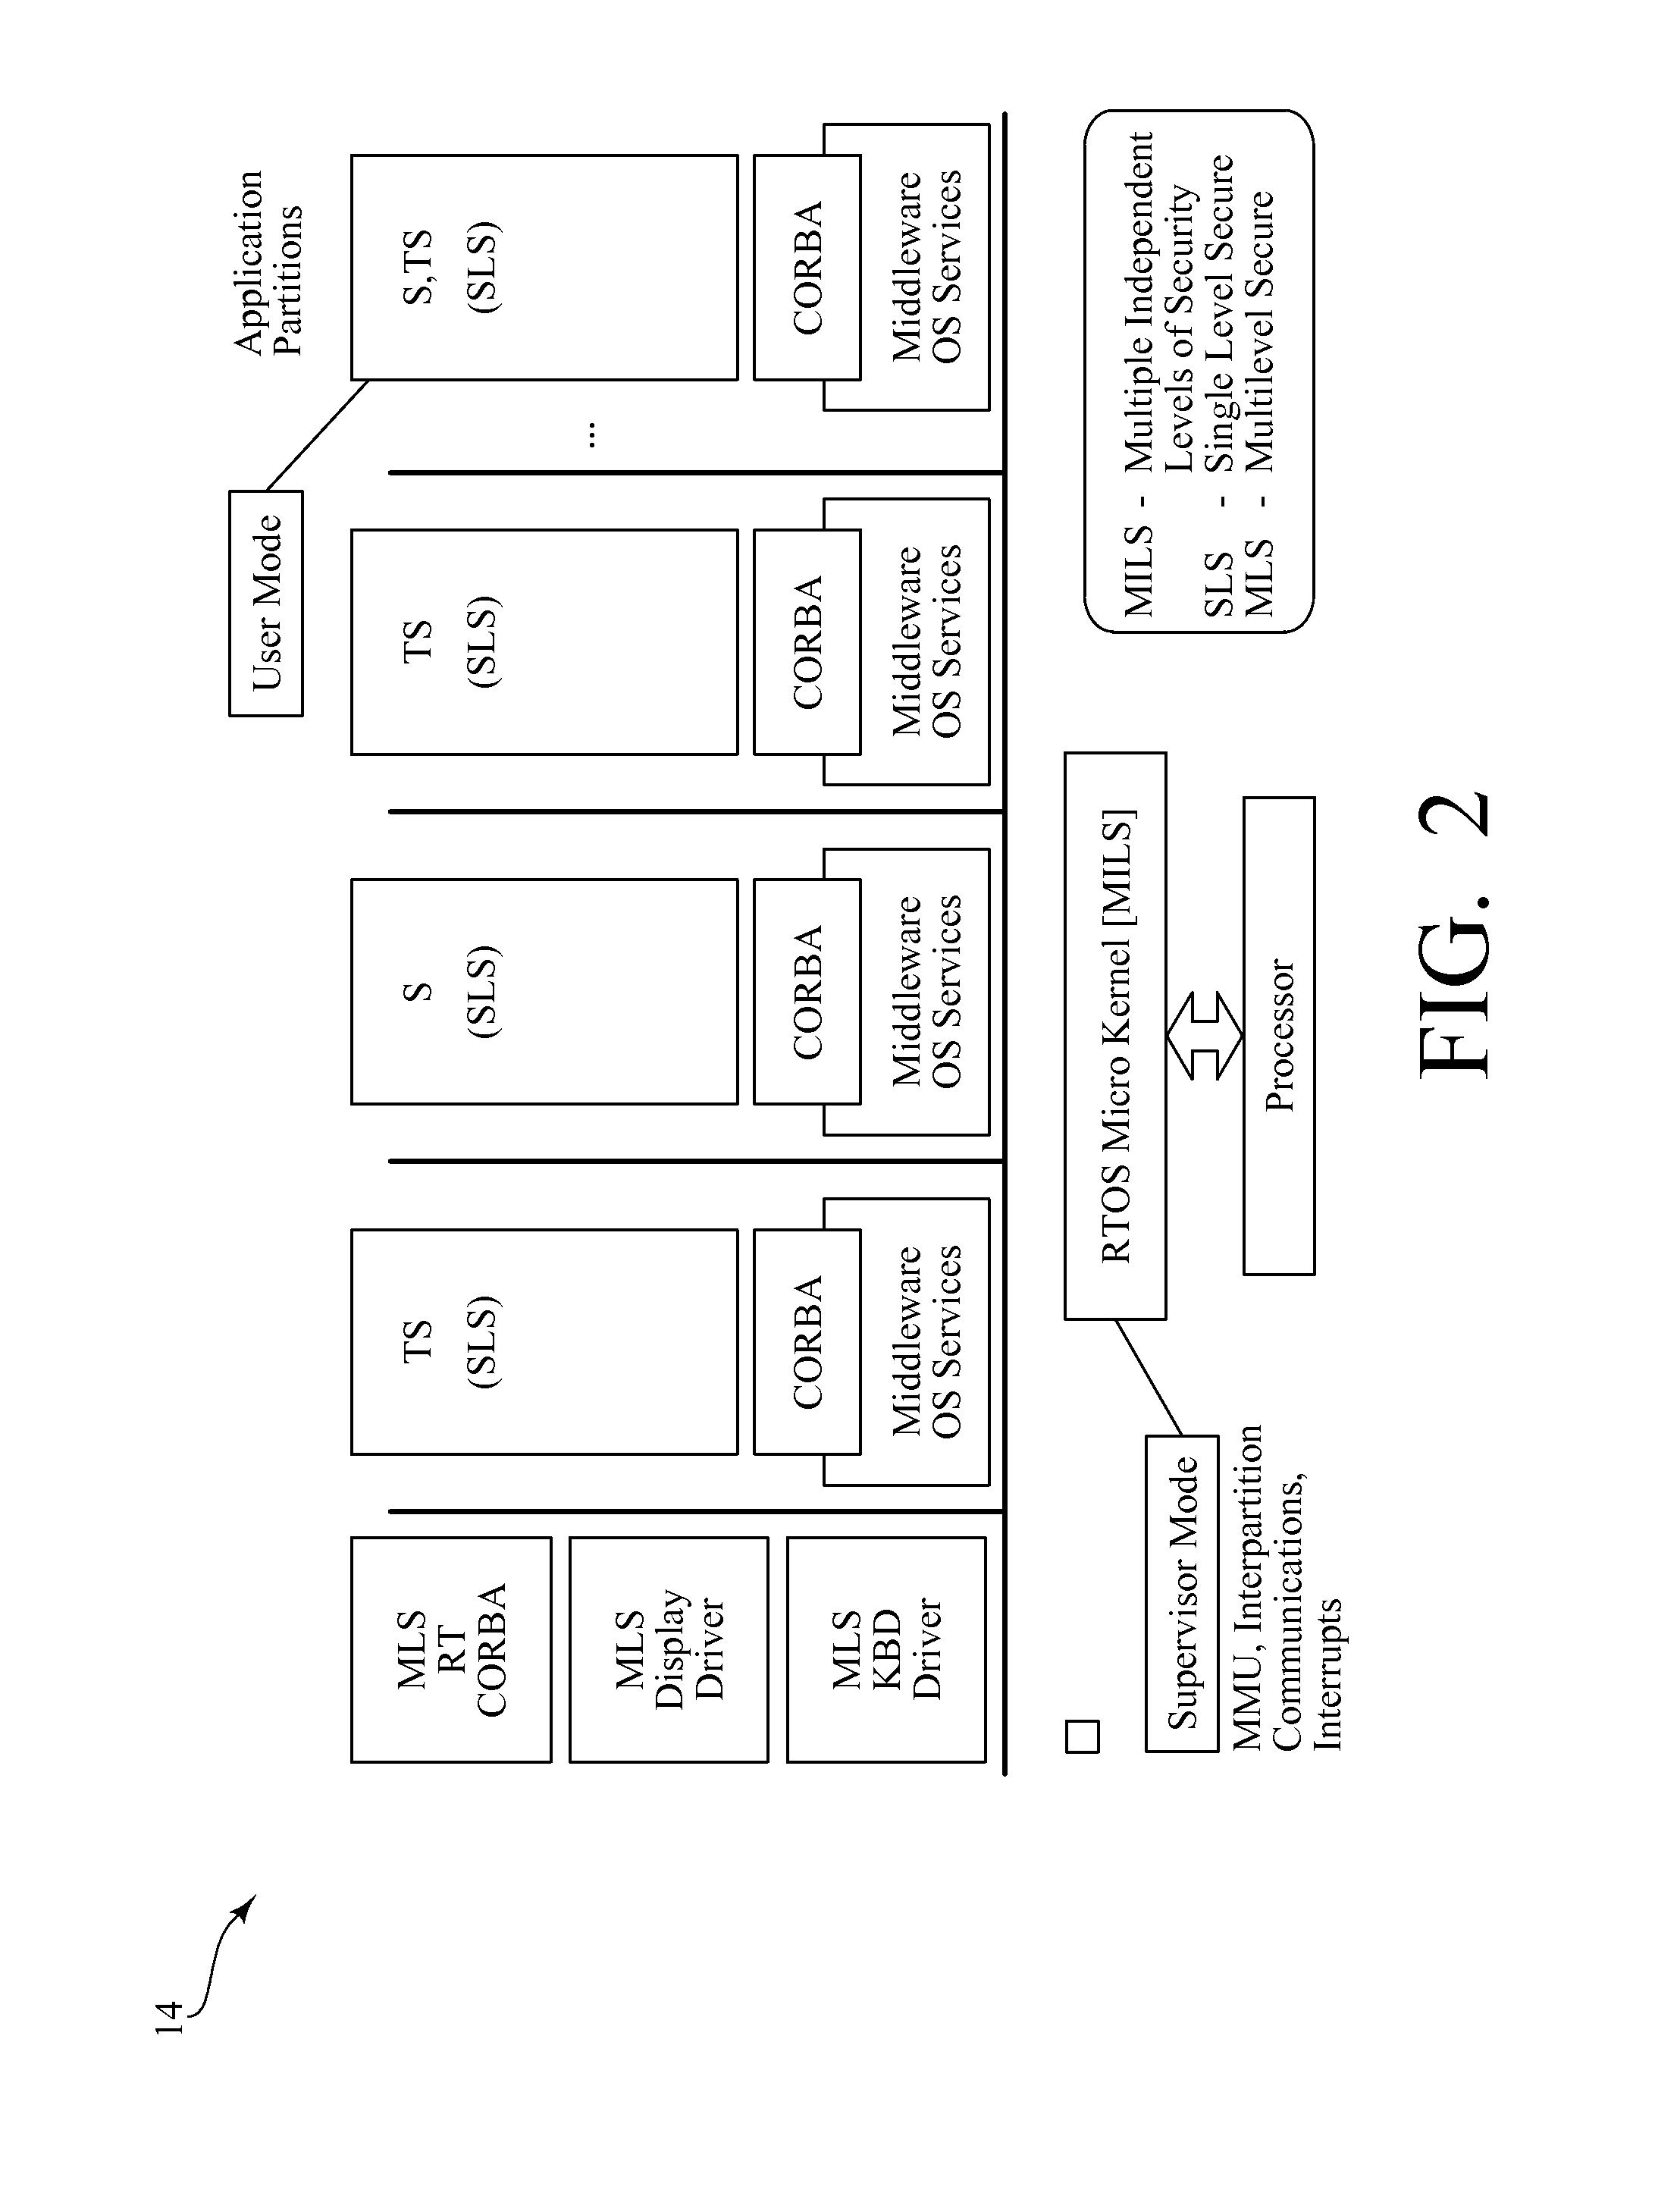 Security enhanced network device and method for secure operation of same